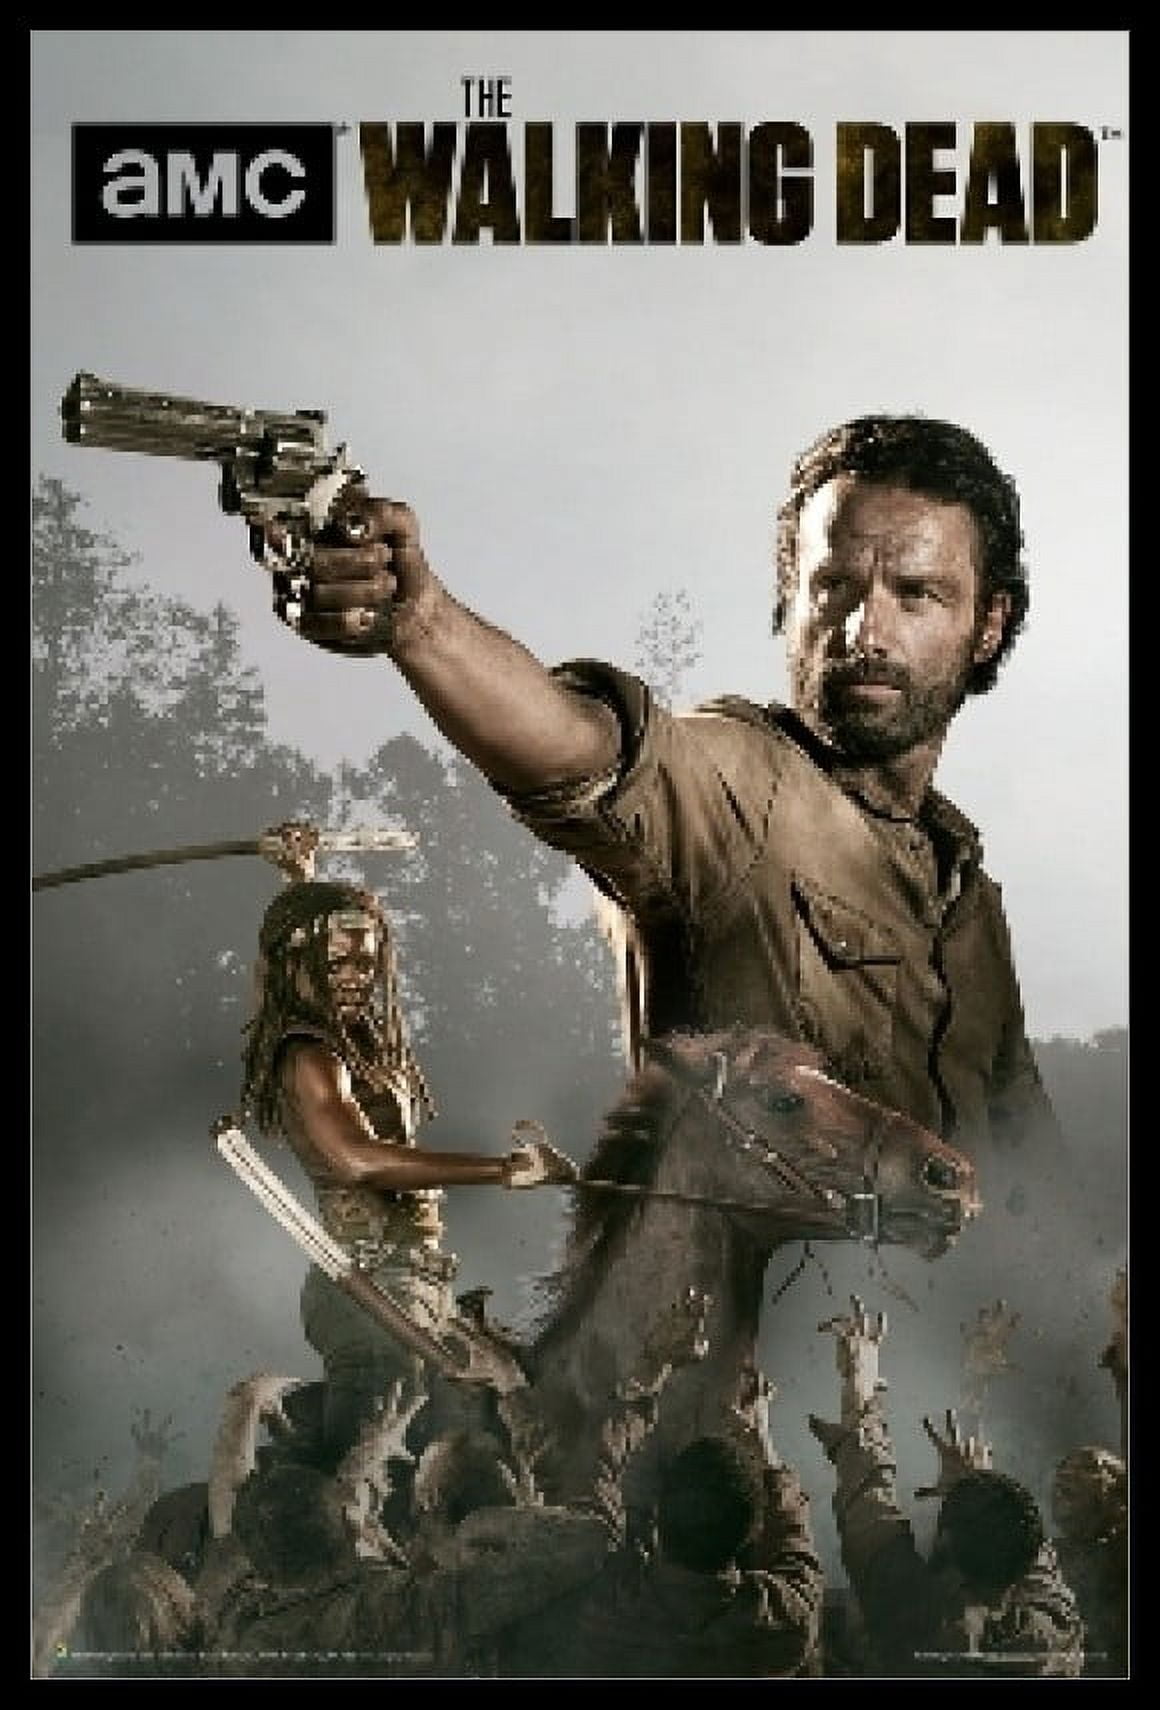 The Walking Dead Season 4 - Rick And Michonne Poster (24 X 36